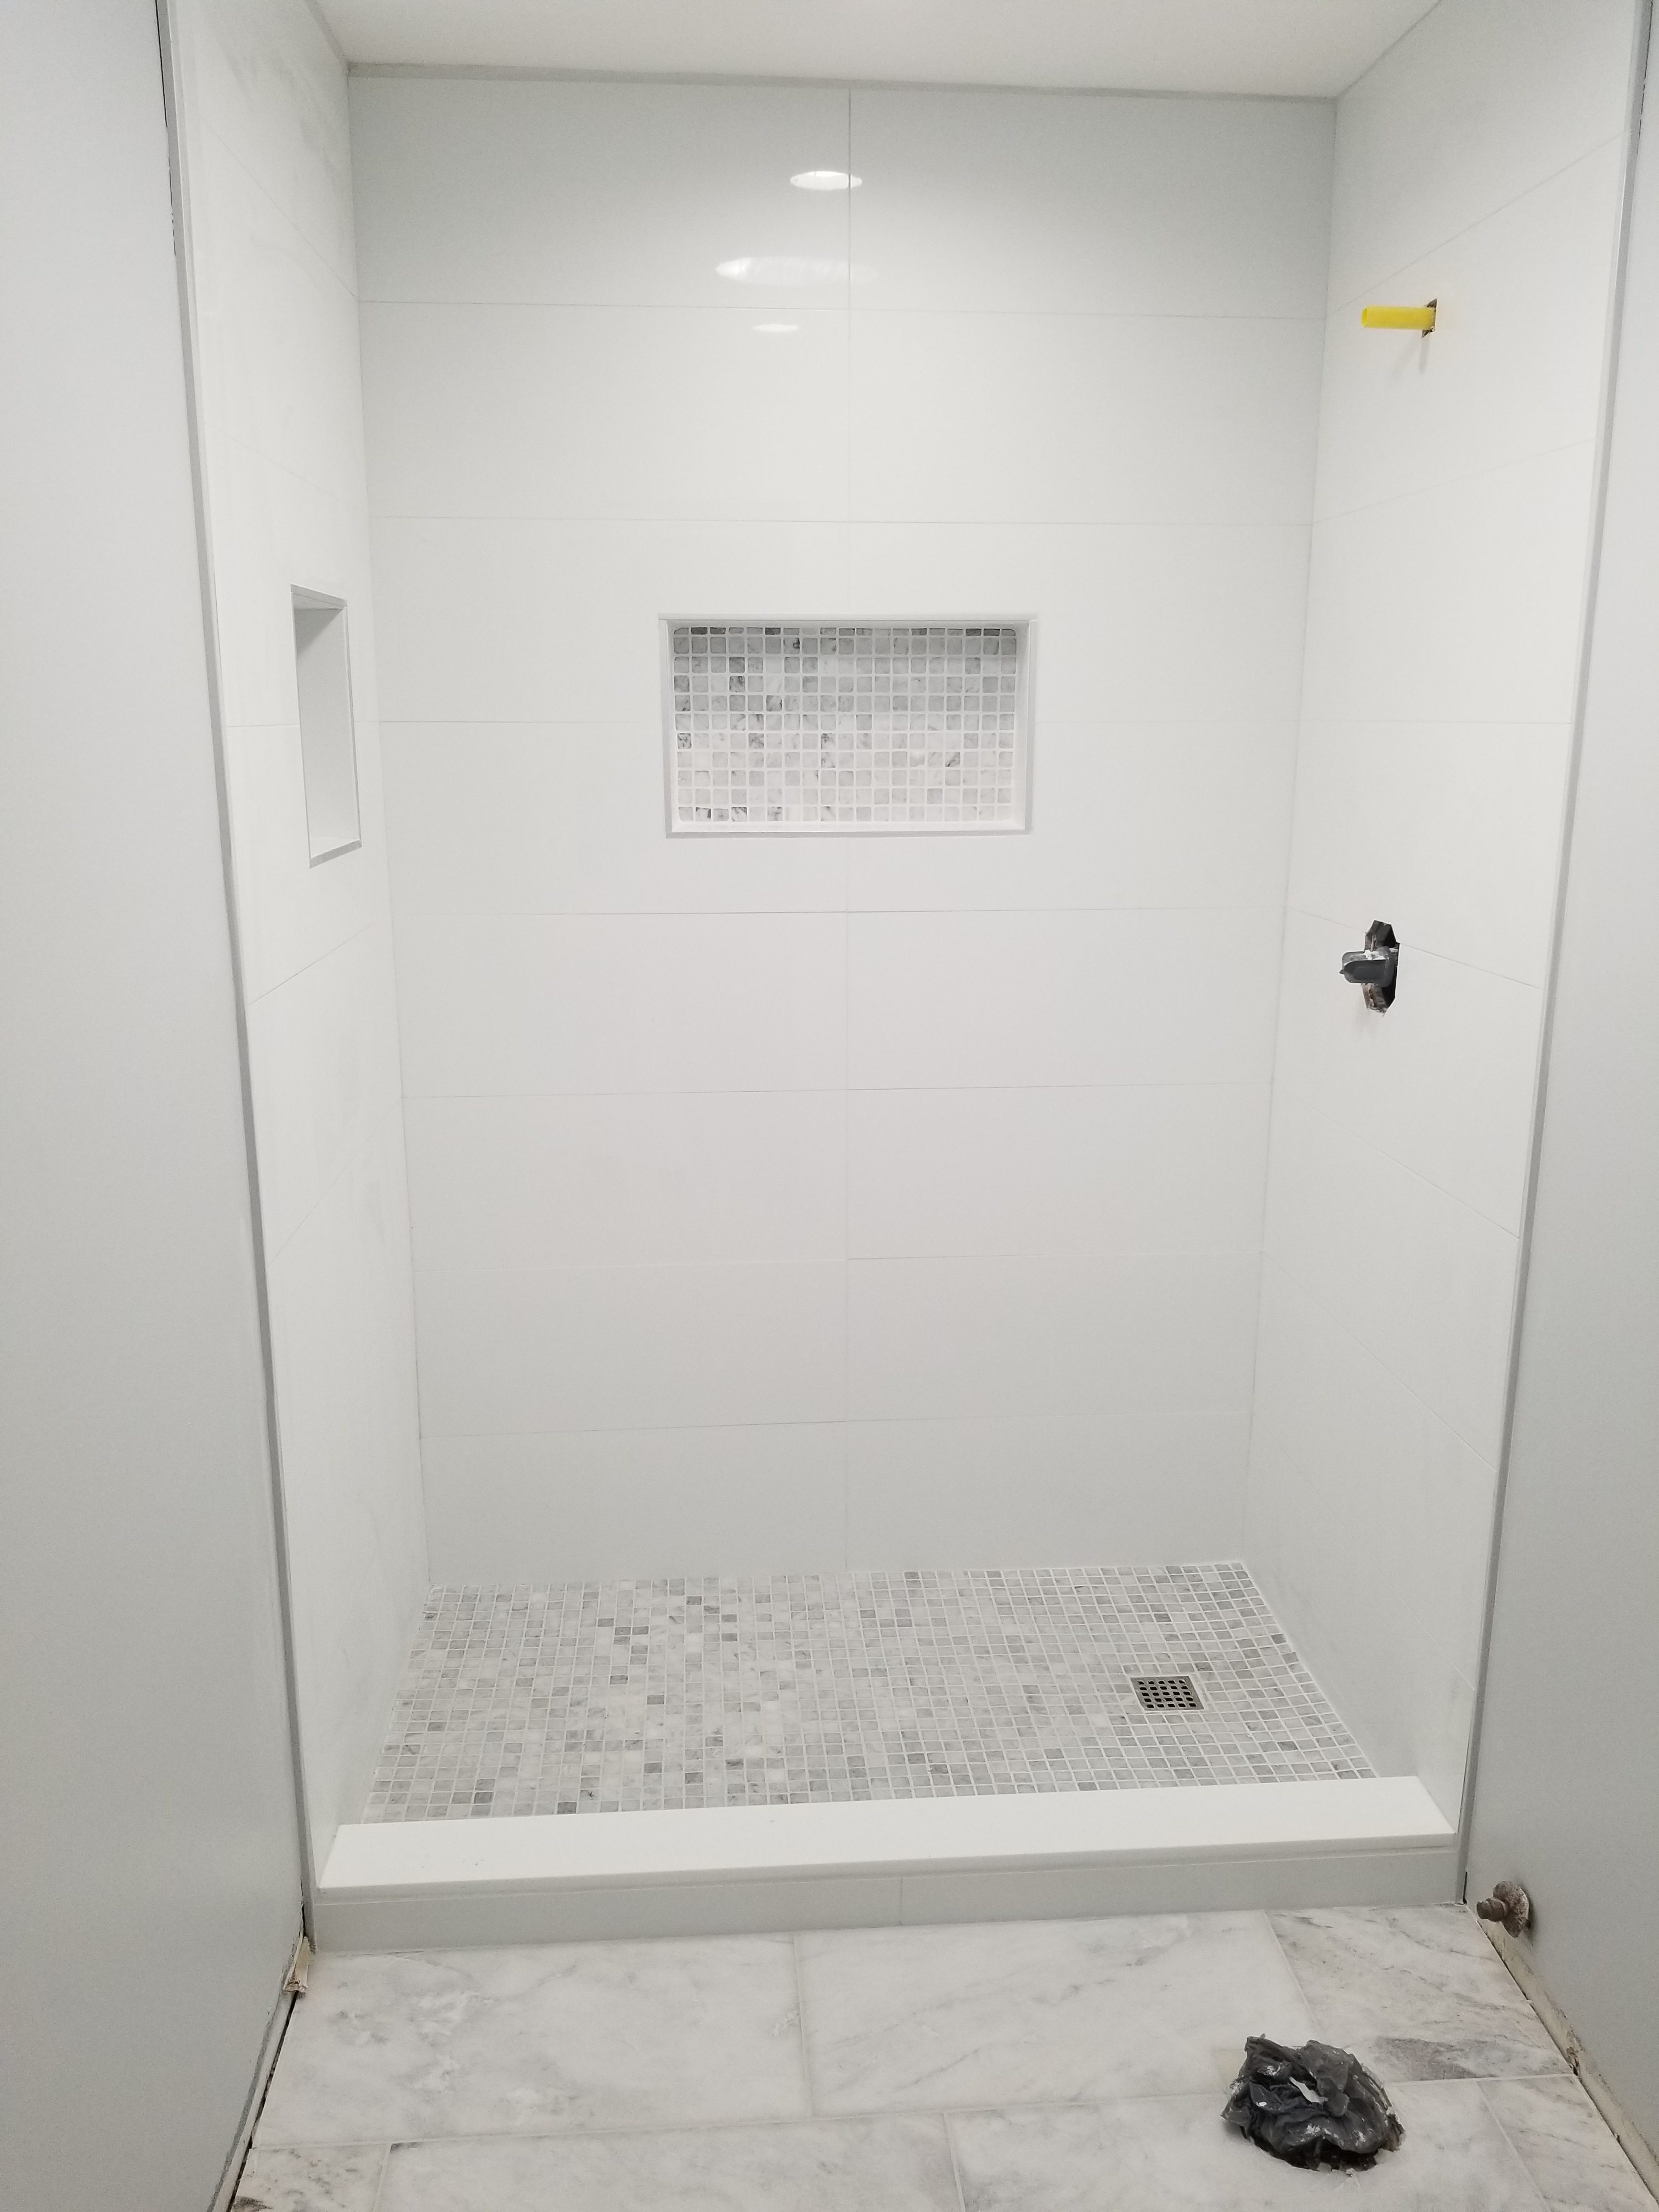 New Shower Construction in St. Louis, MO